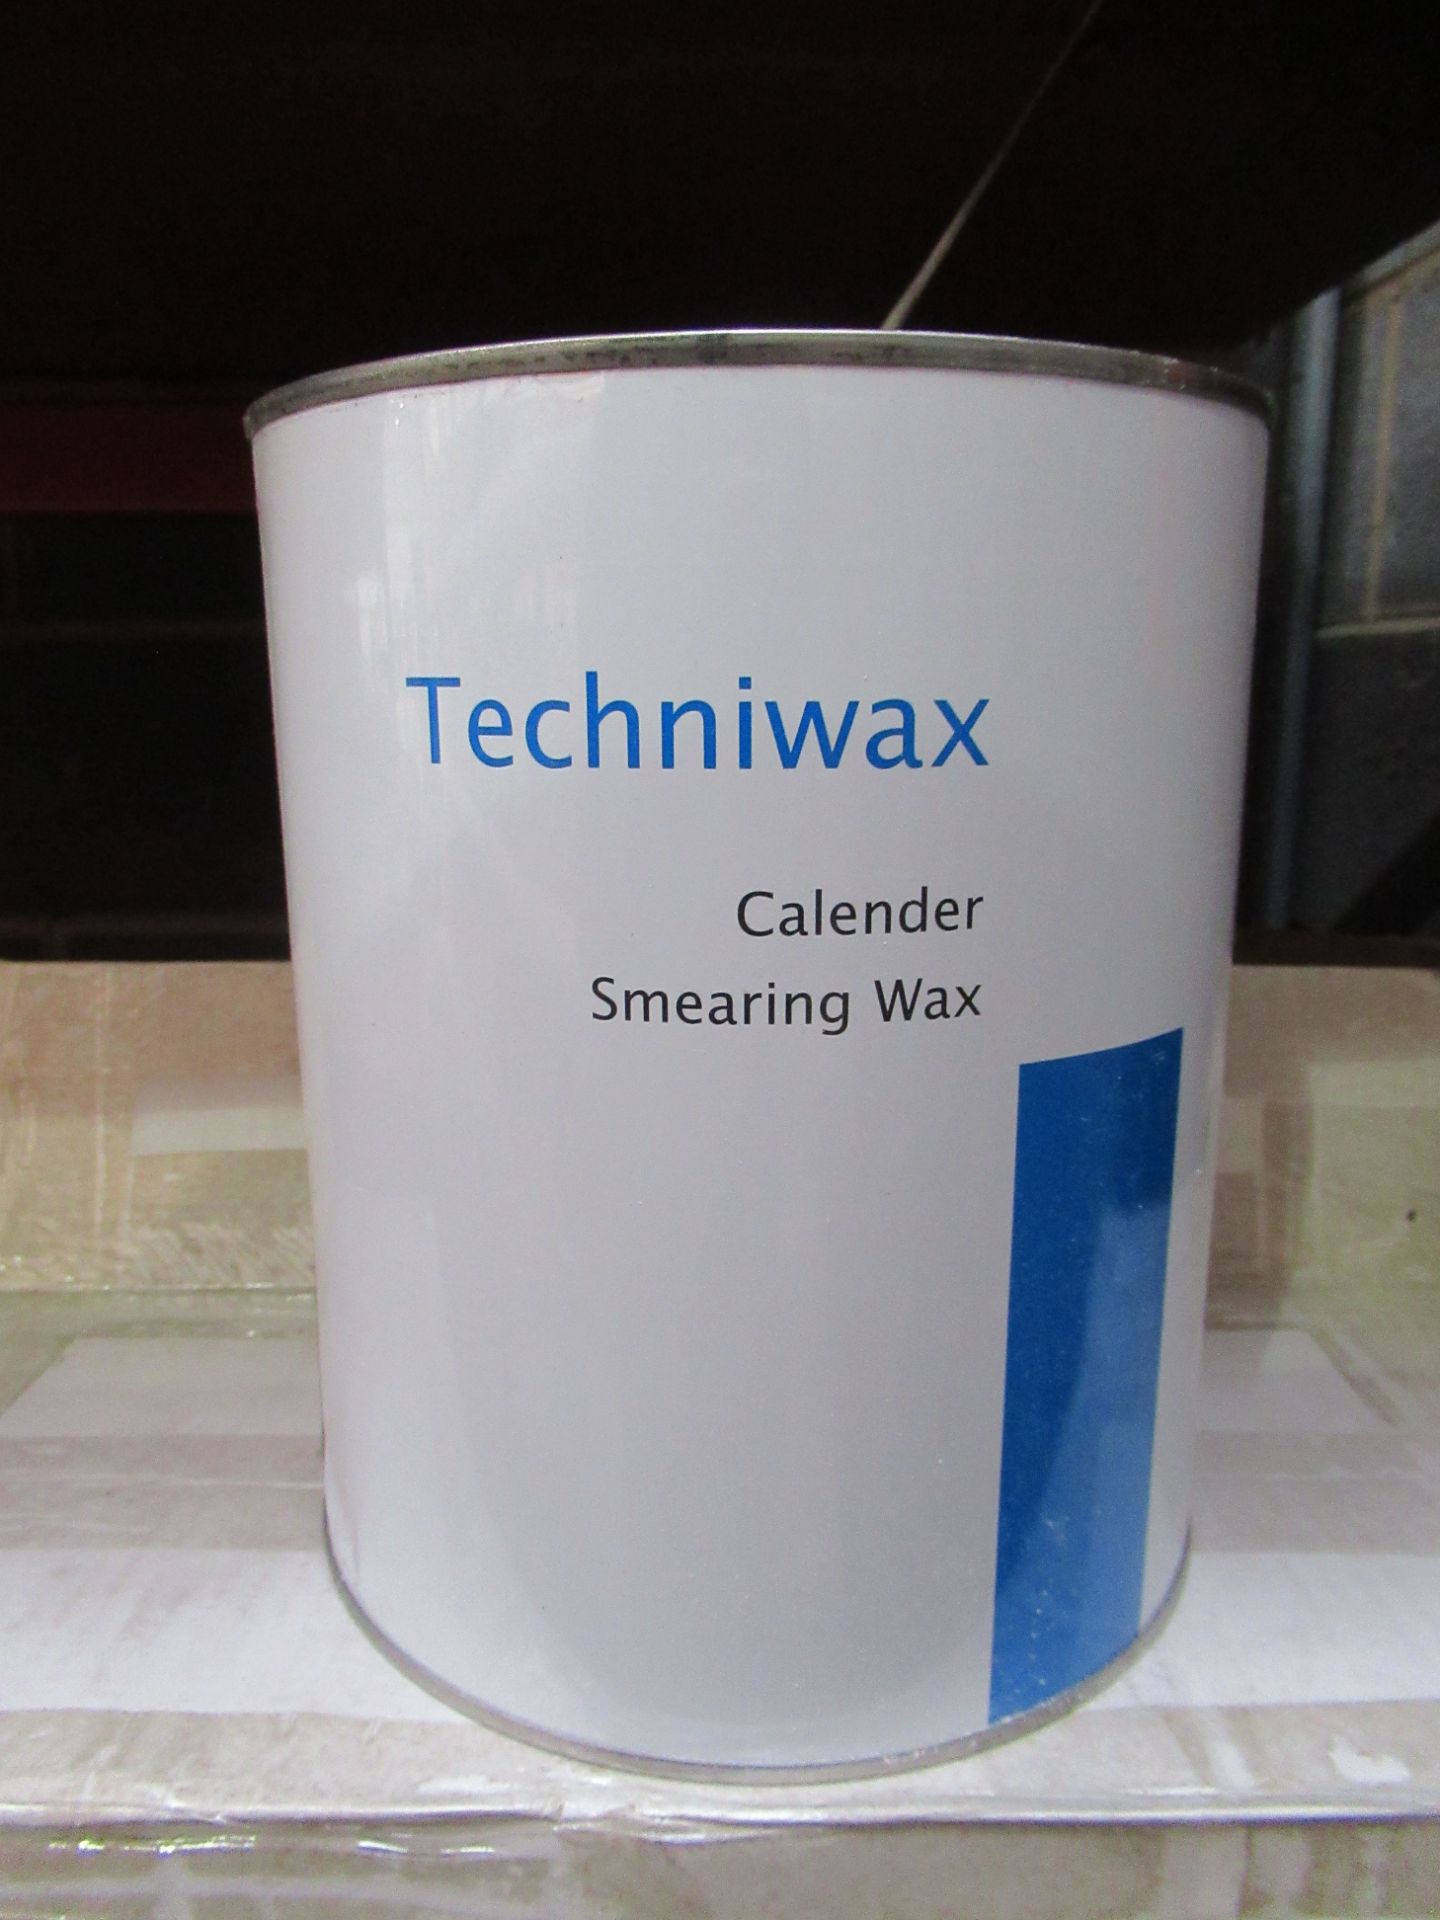 6x tins of Techniwax - Image 4 of 4